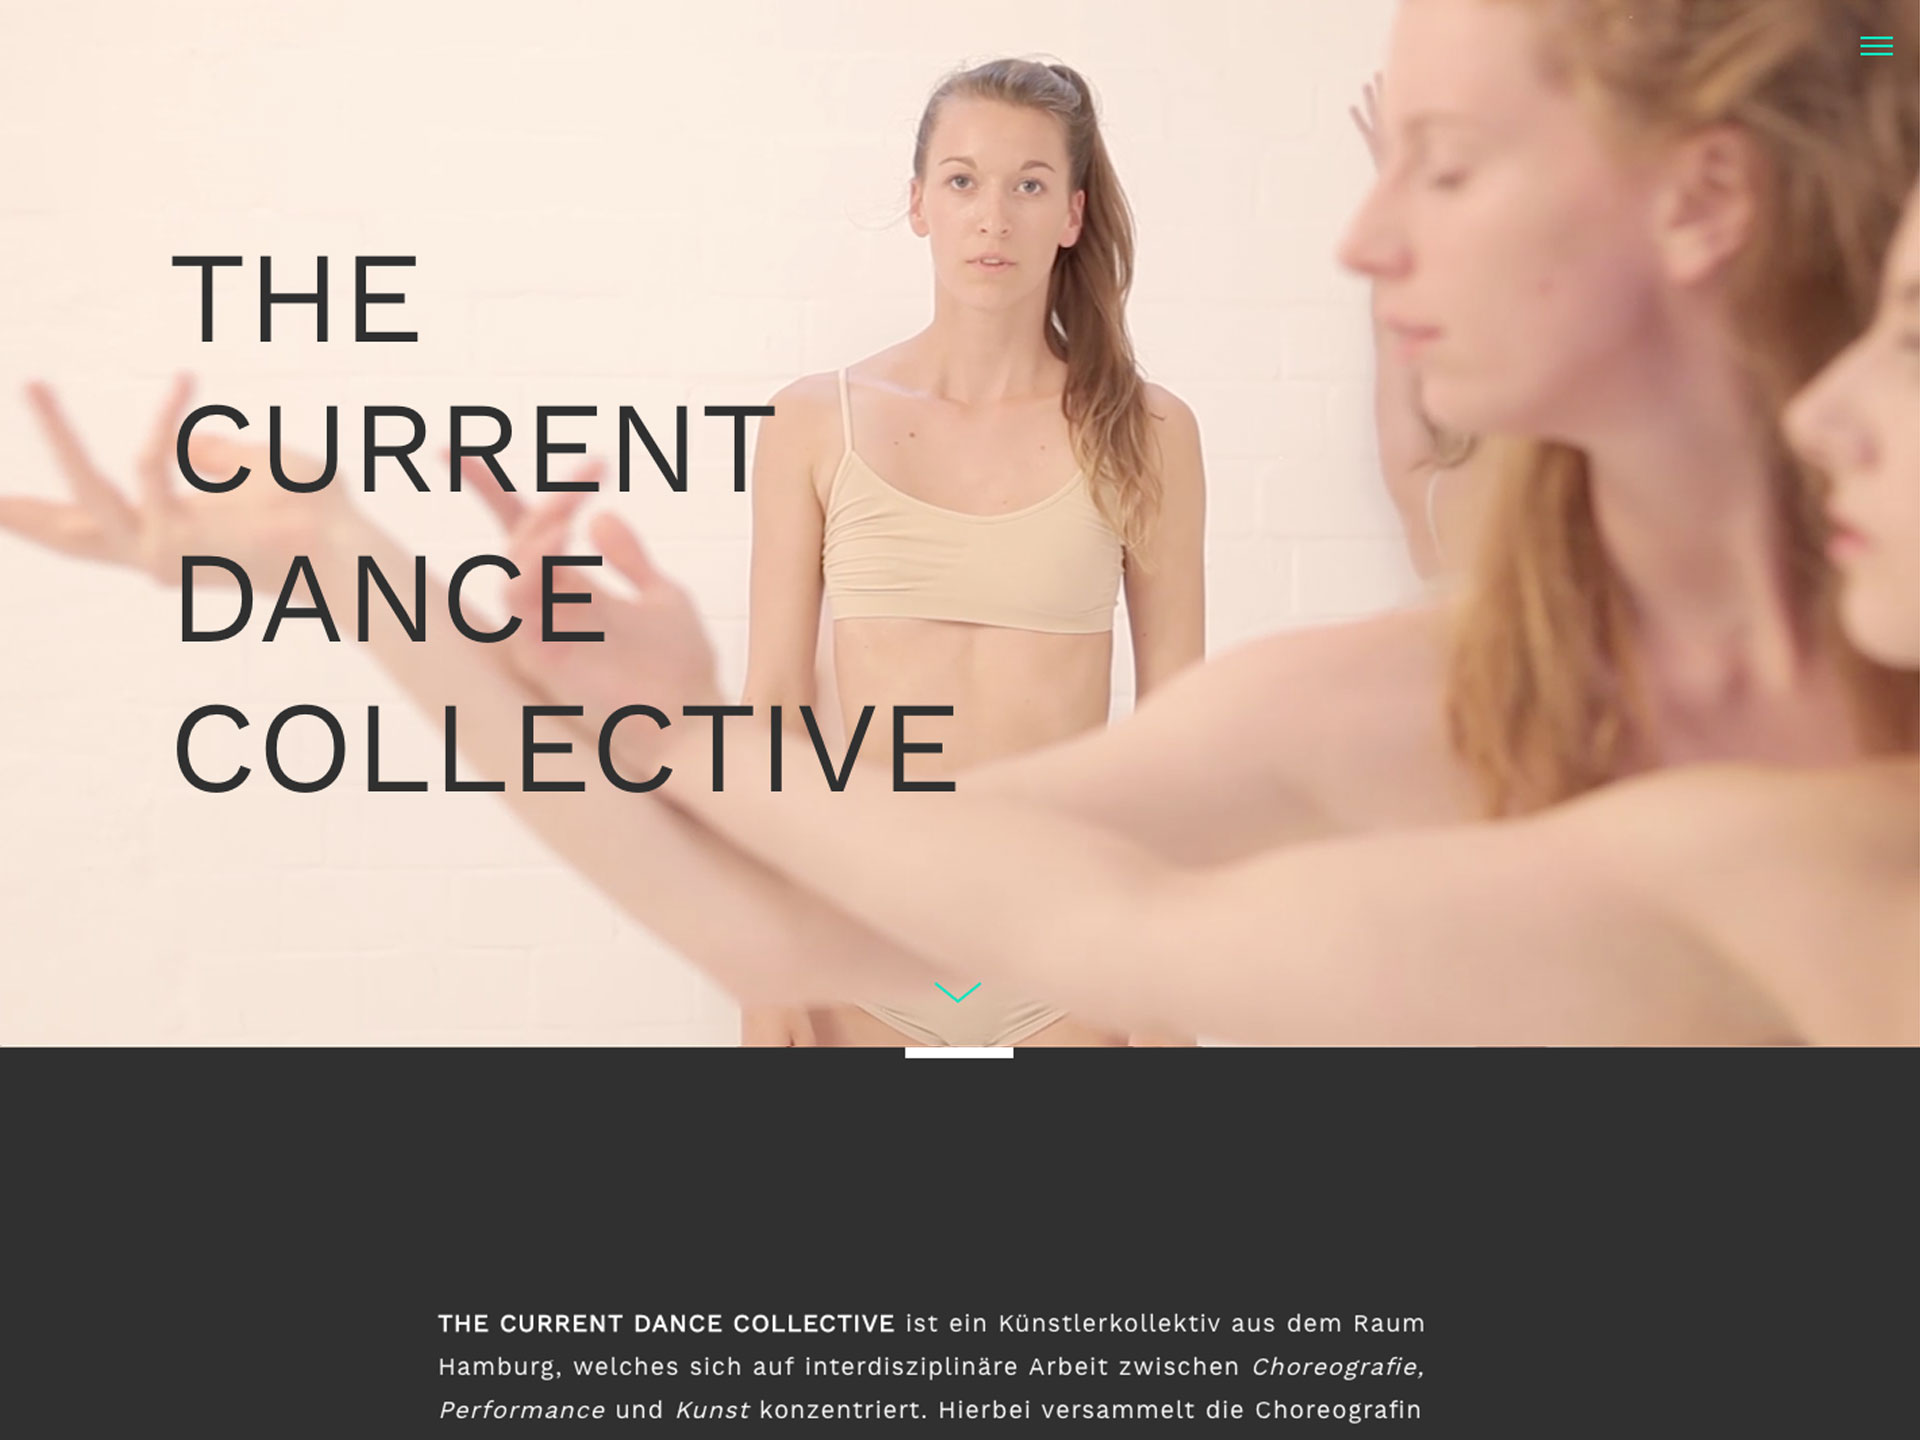 THE CURRENT DANCE COLLECTIVE ()